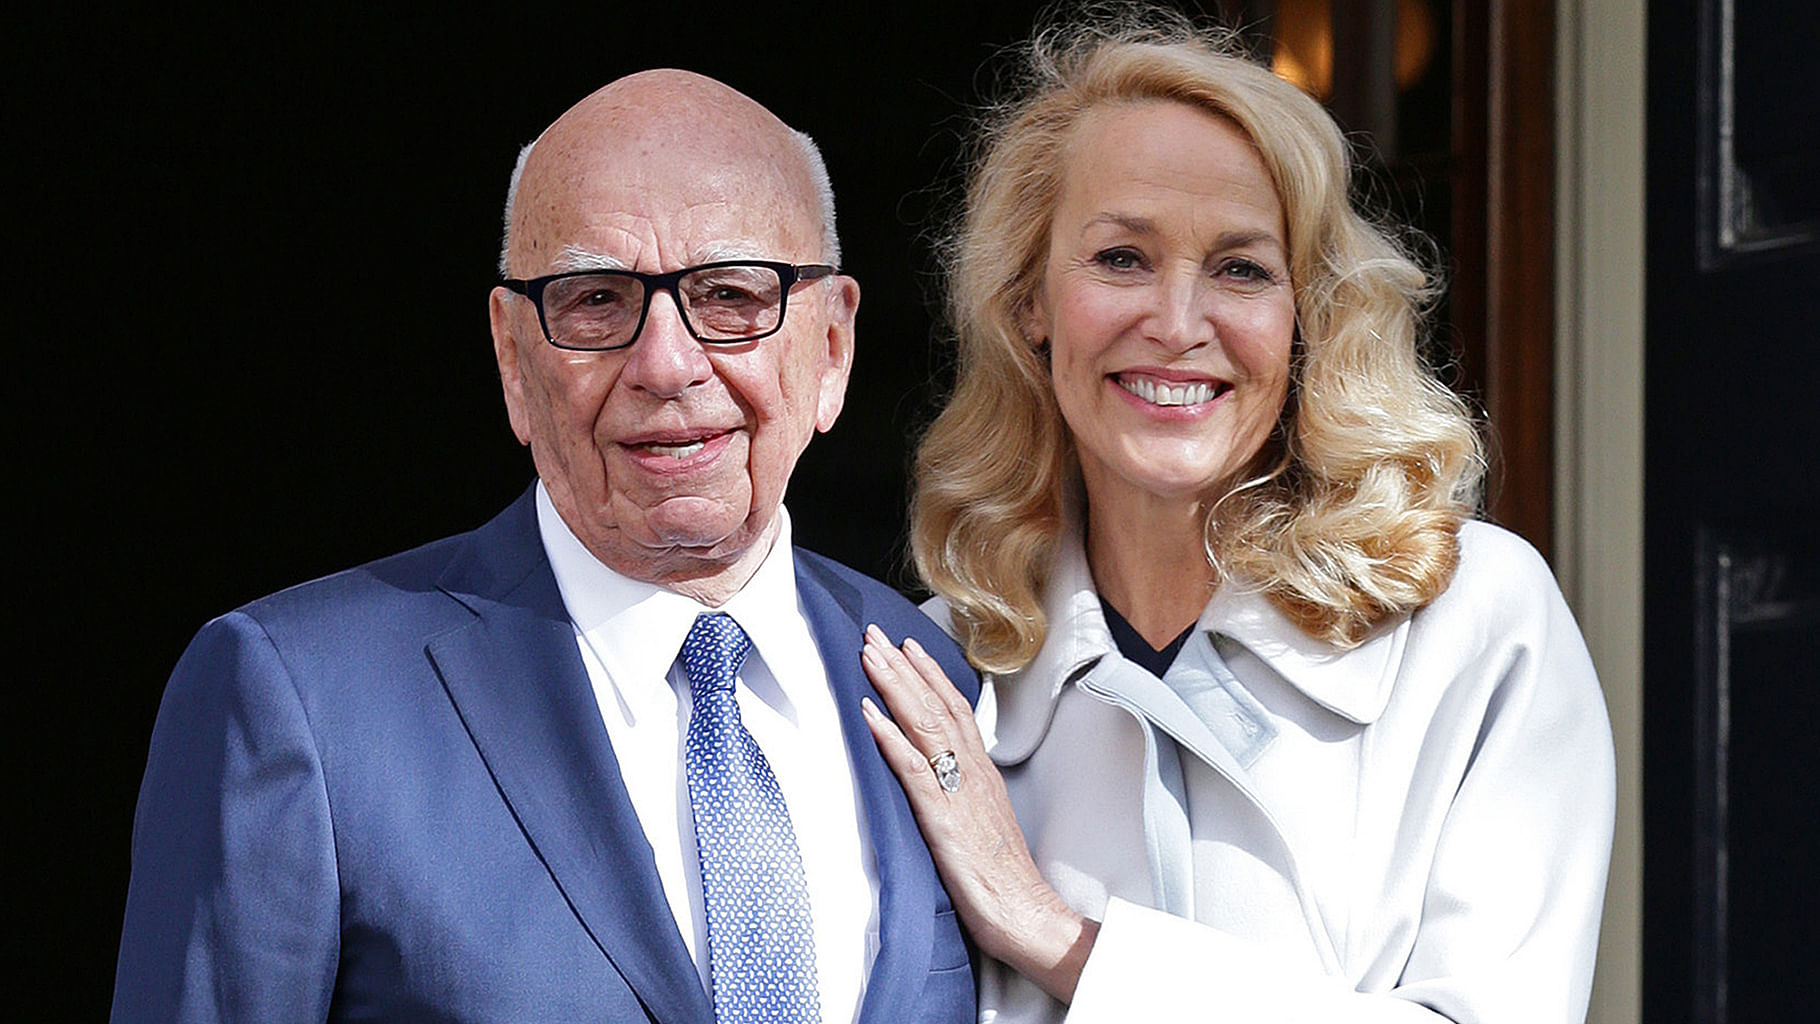 News Corp Executive Chairman Rupert Murdoch and Jerry Hall
leave Spencer House, London, after getting married on Friday. (Photo: AP) &nbsp; &nbsp;  &nbsp;